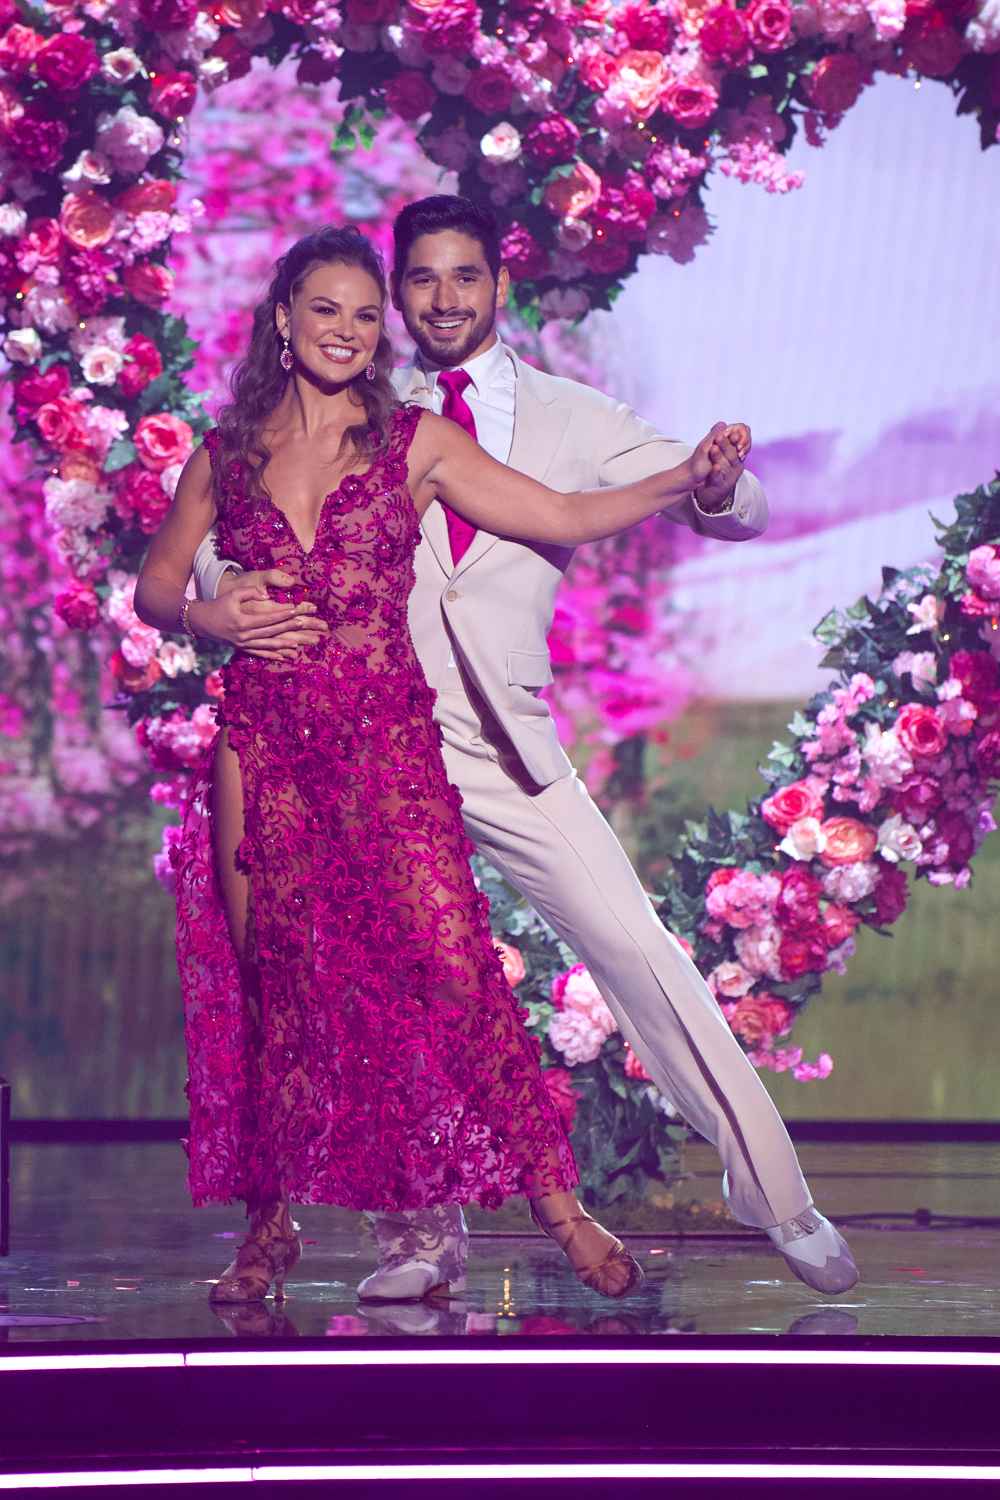 DWTS’ Alan Bersten Says He and Hannah Brown Call Each Other ‘Babe’ ‘All the Time’